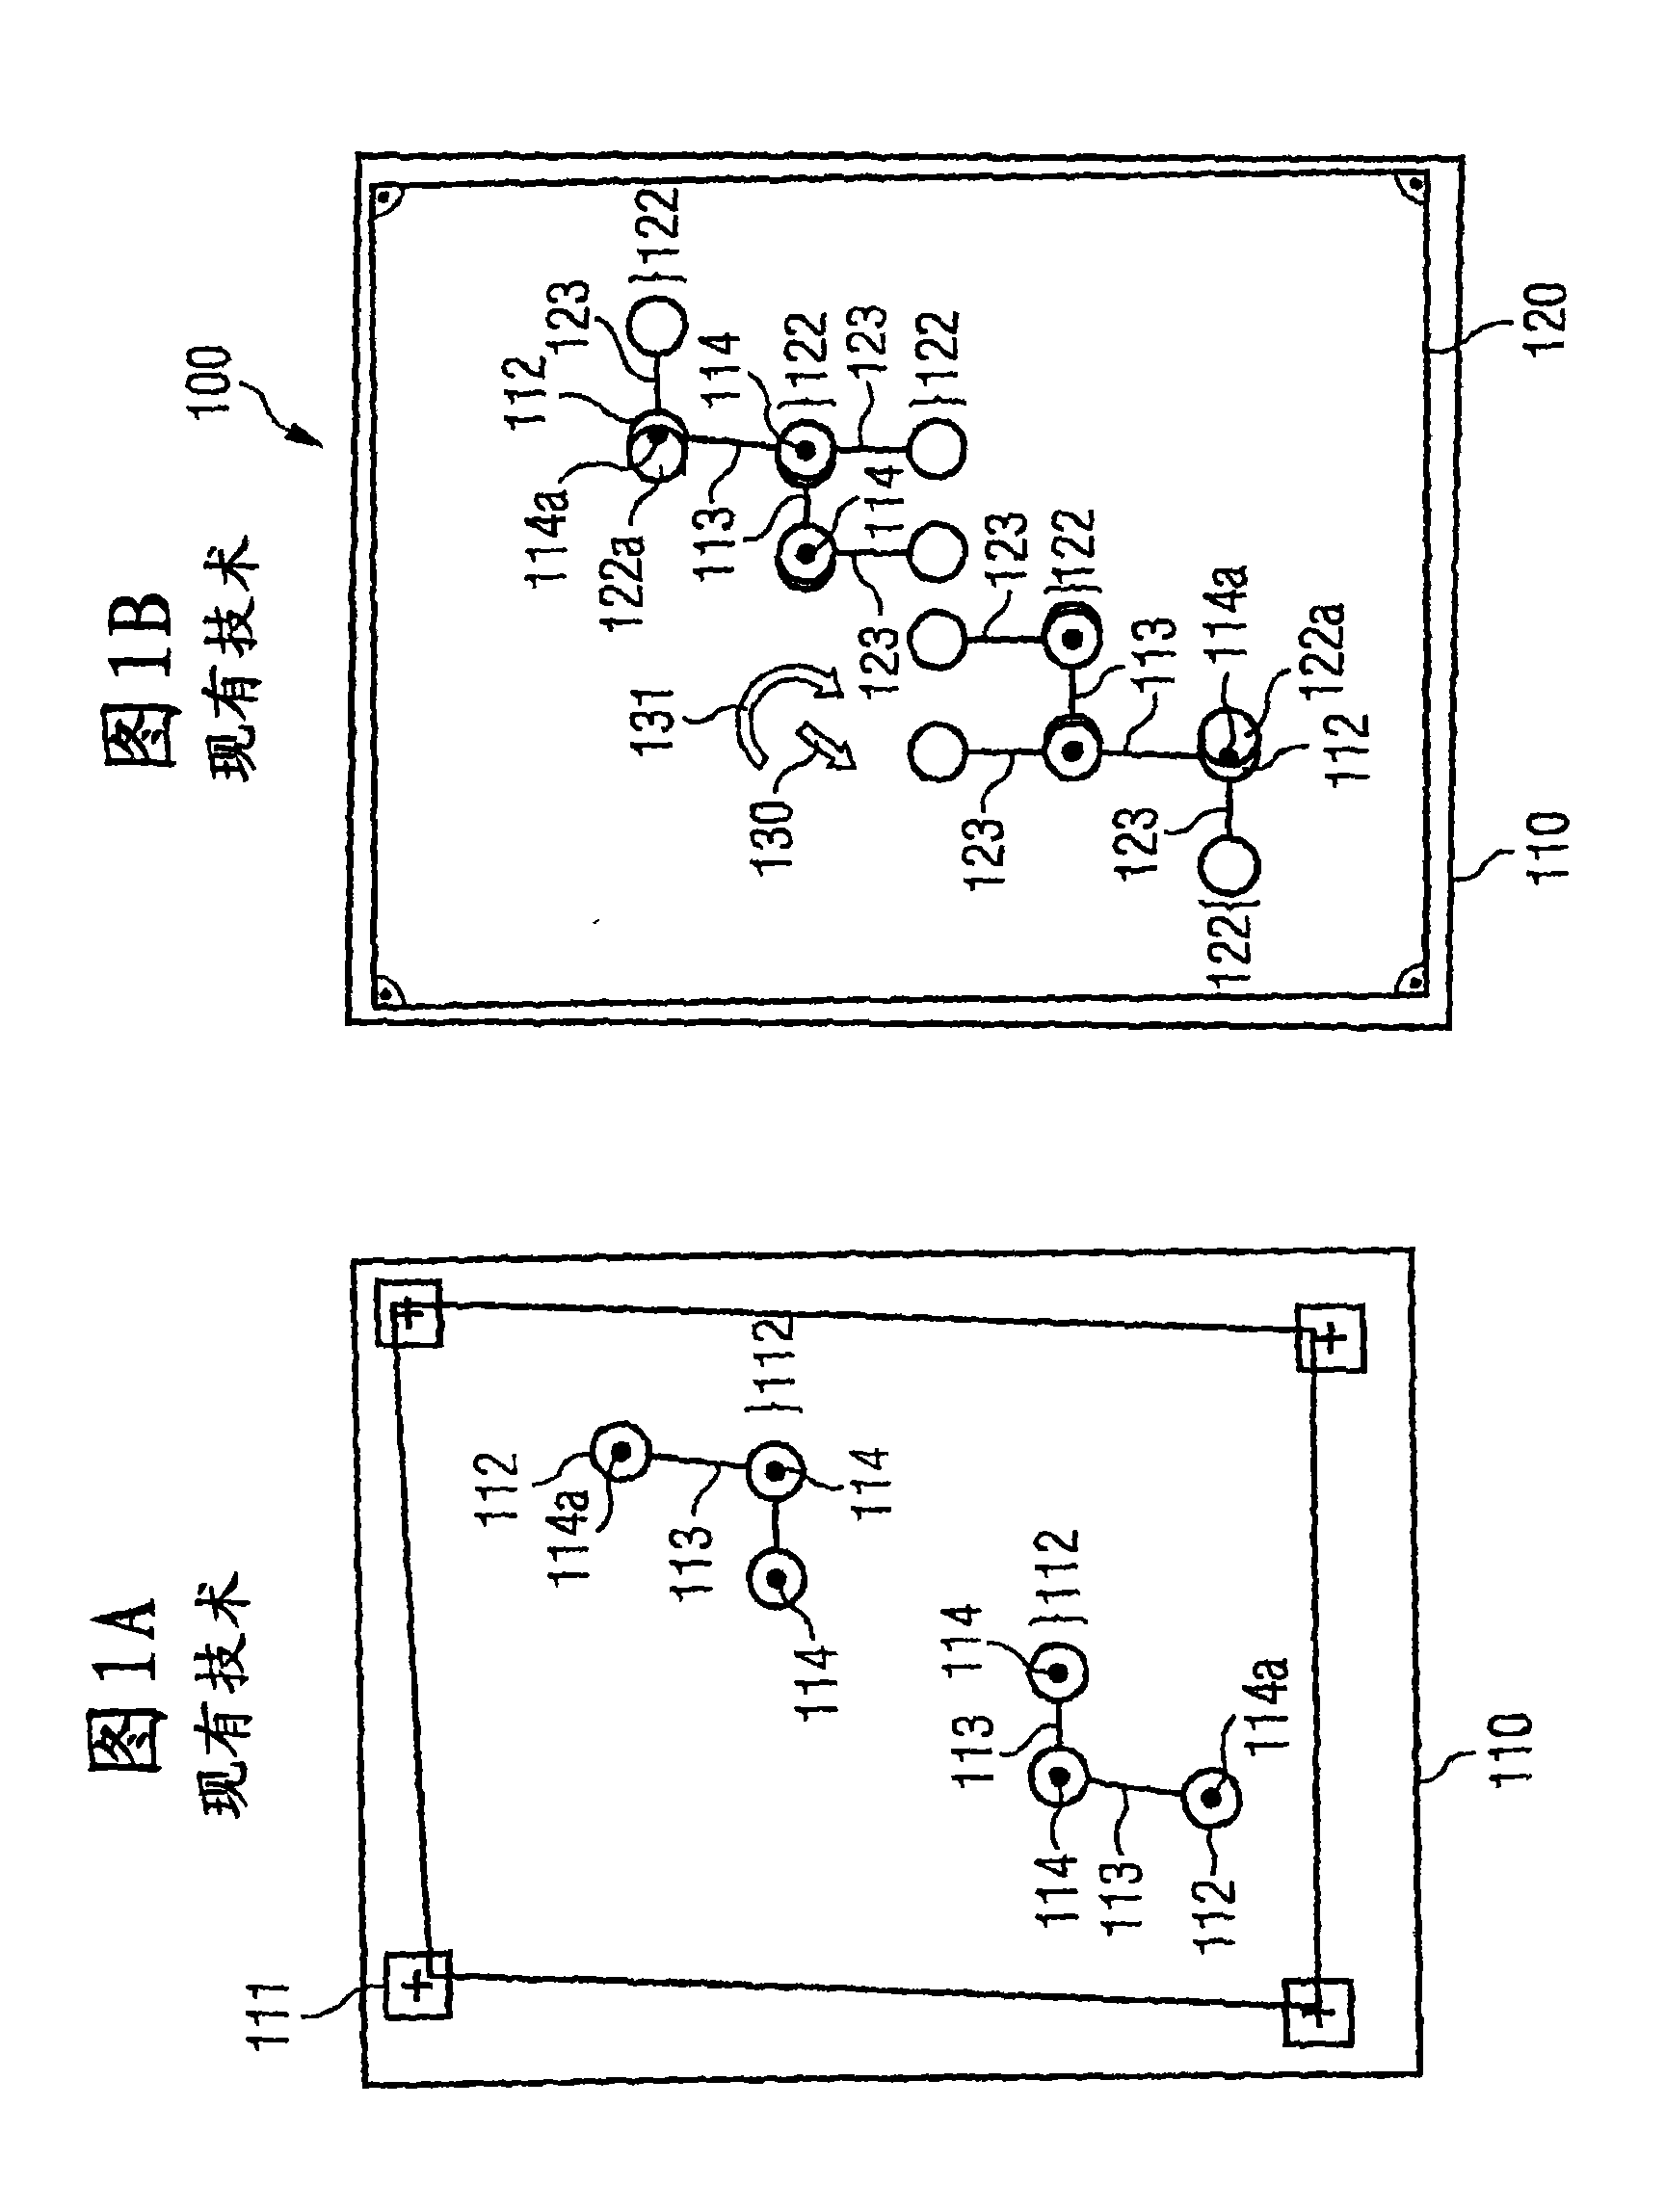 Method for producing substrates